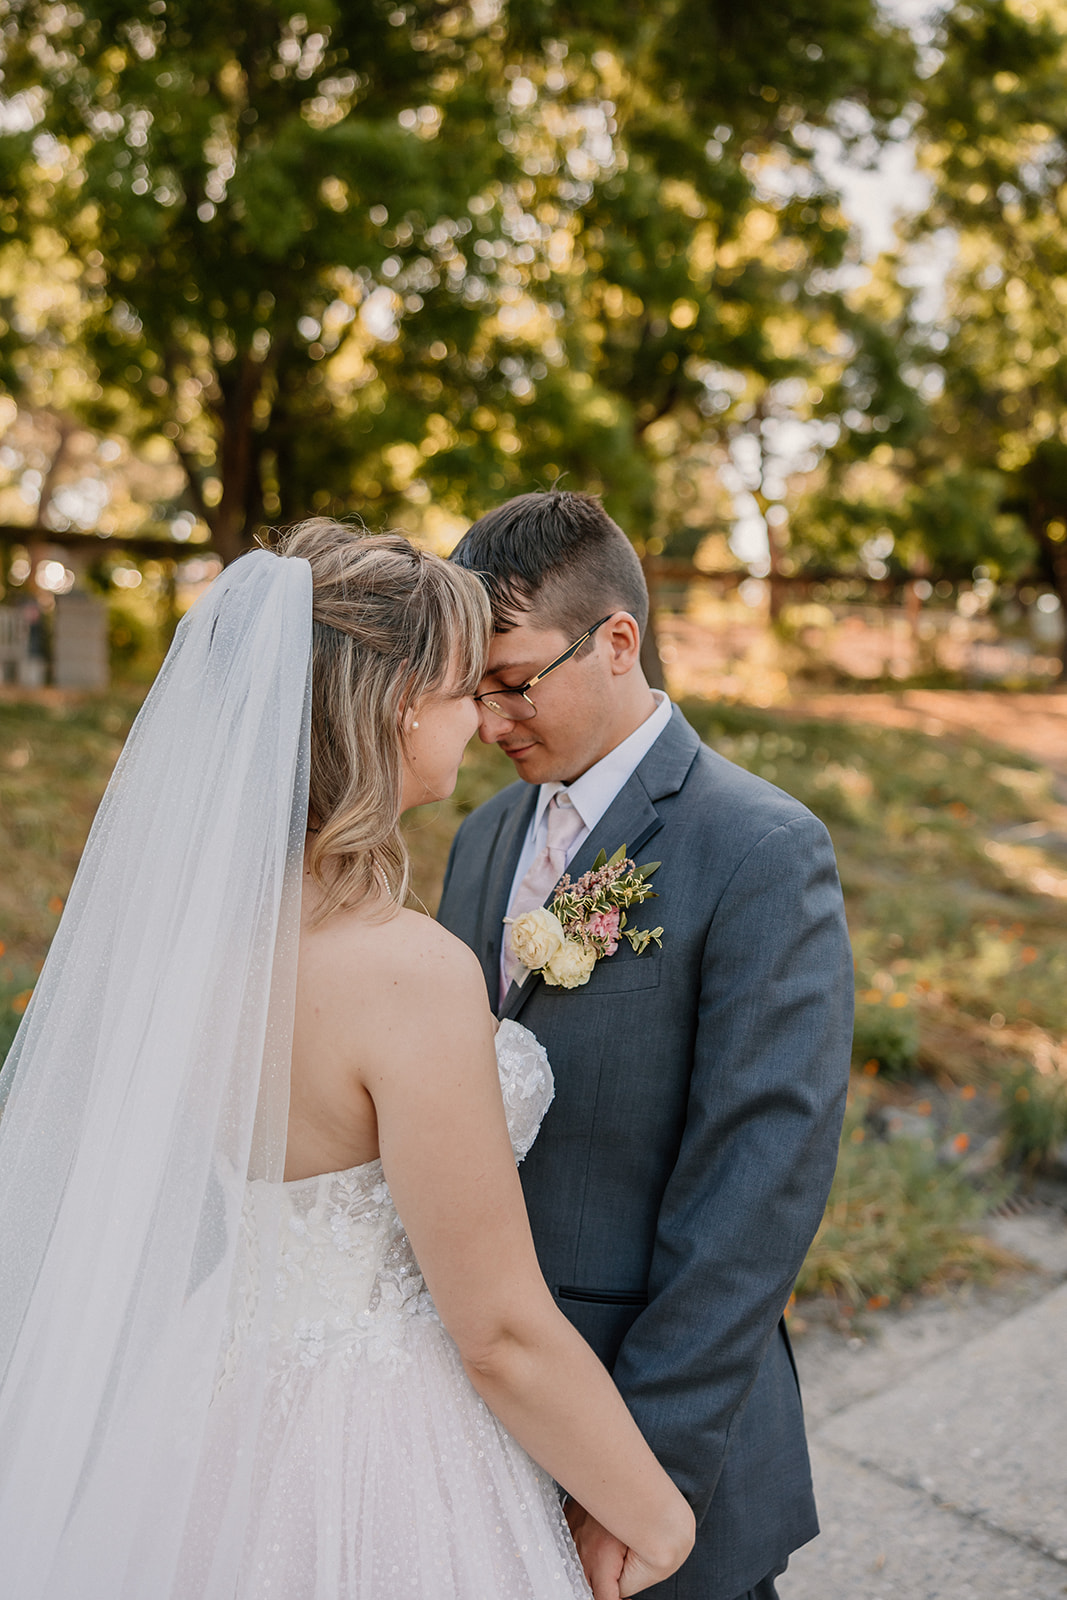 A bride and groom share a kiss outdoors in a garden setting, with the bride holding a large bouquet of flowers and a scenic background of trees and a pond at their wedding at the gardens at heather farms